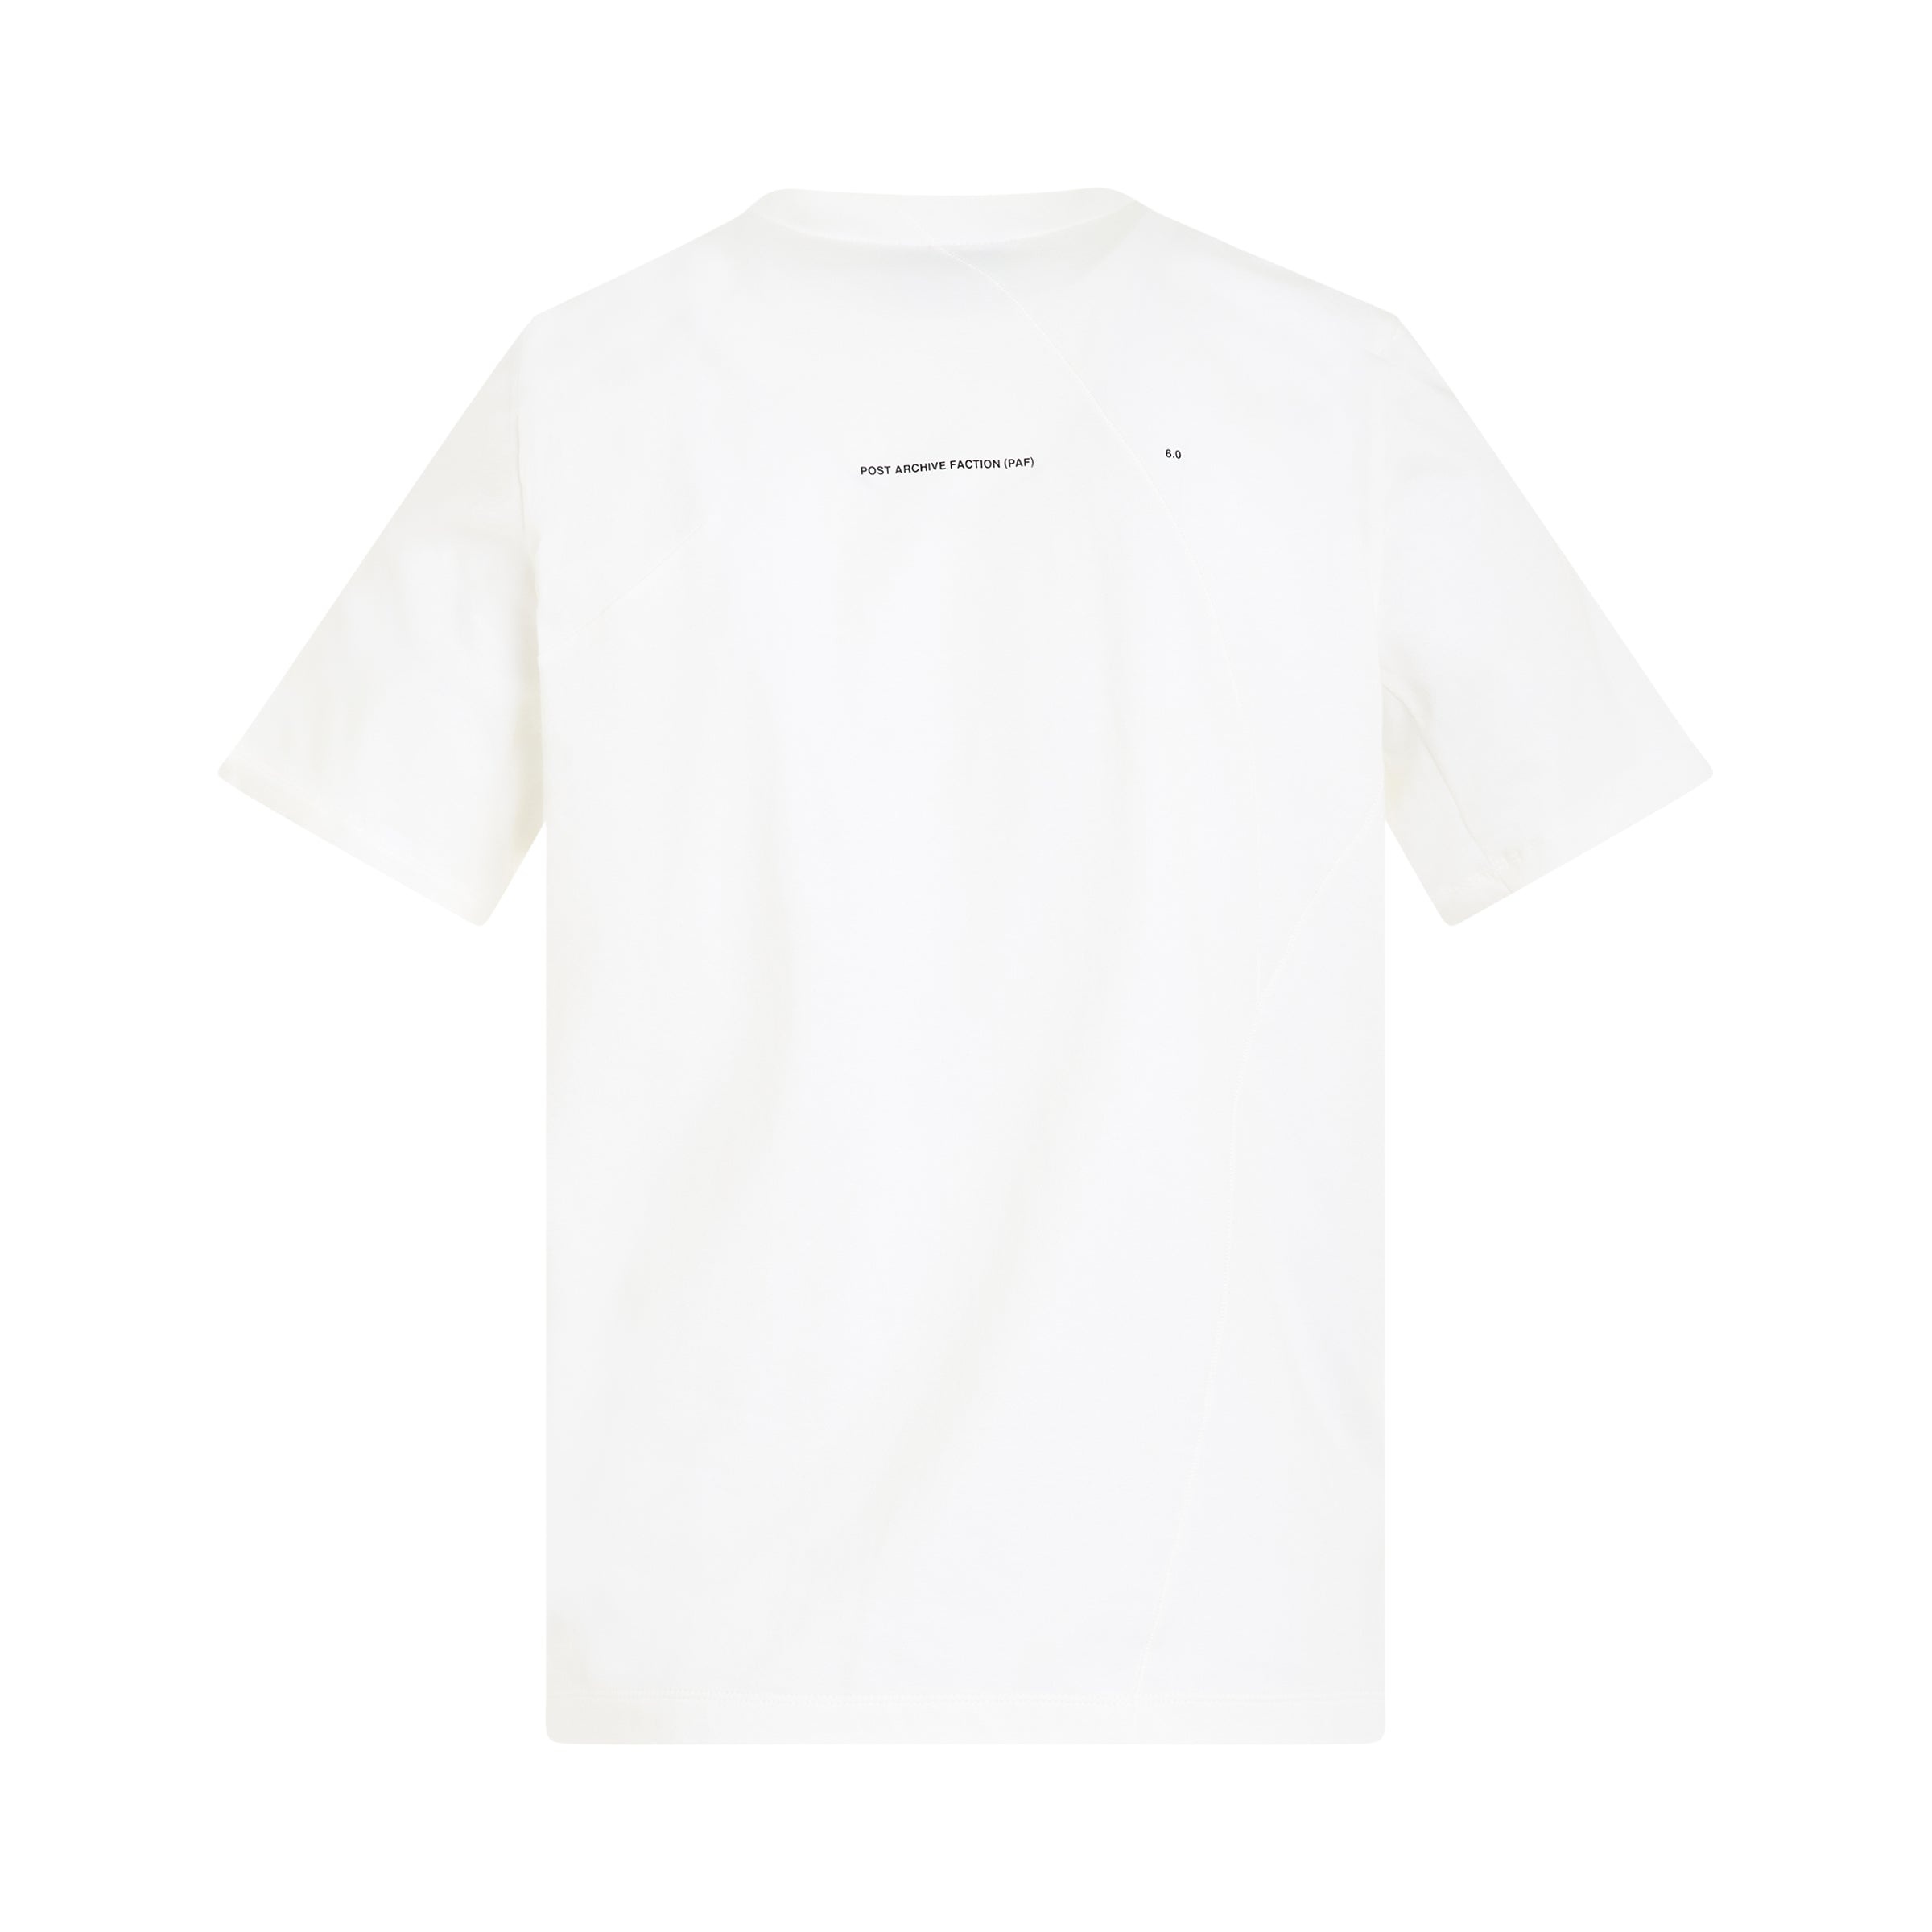 6.0 T-Shirt (Right) in White - 4